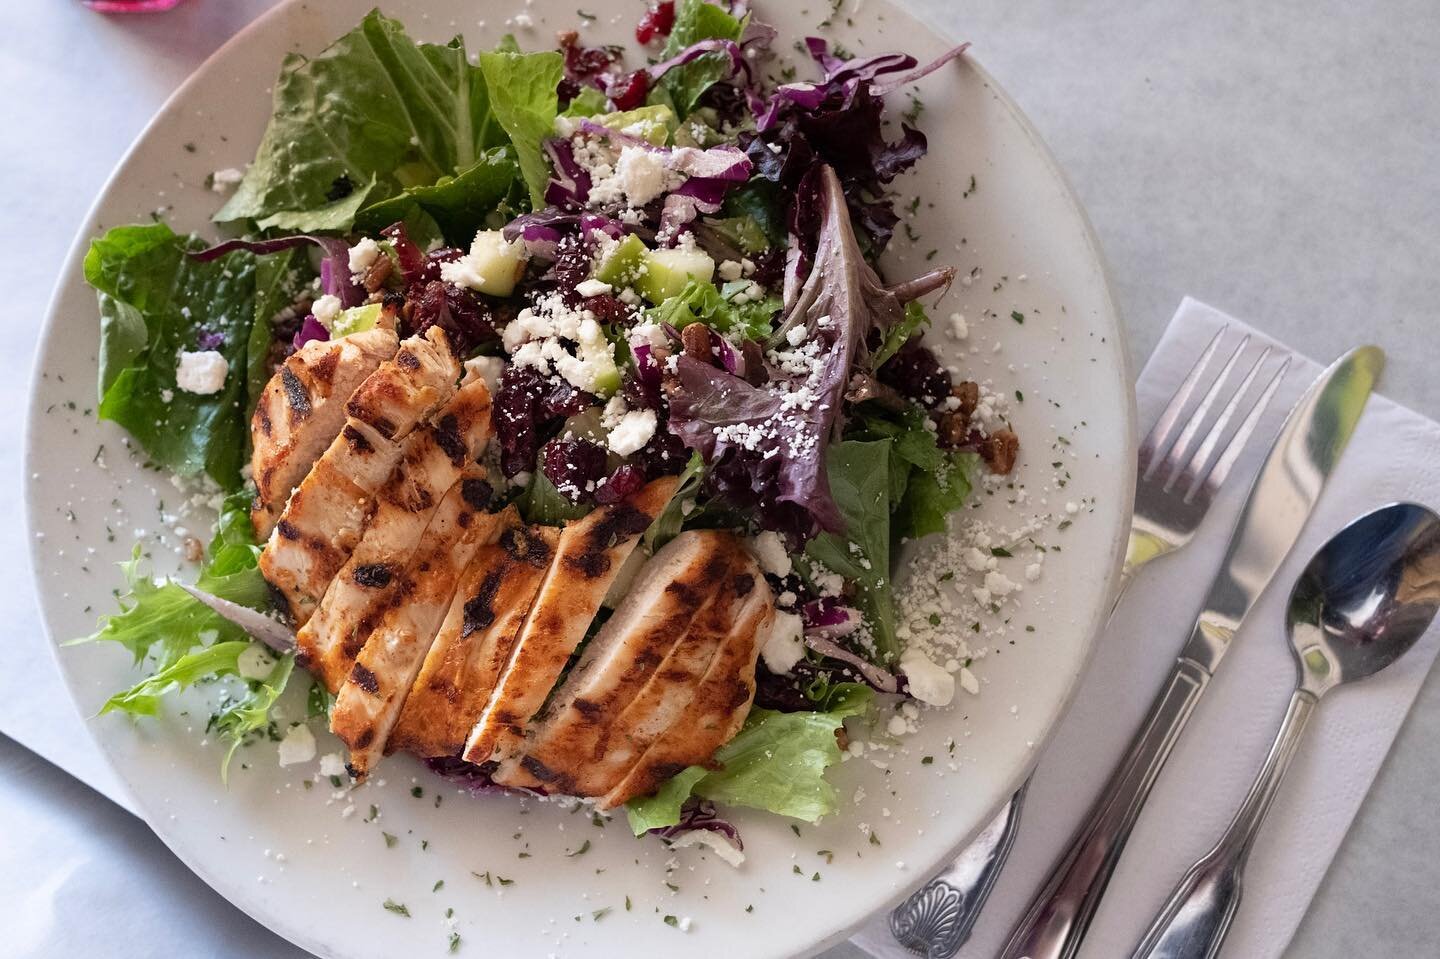 Get your week off to a great start with one of our delicious salads! 😍